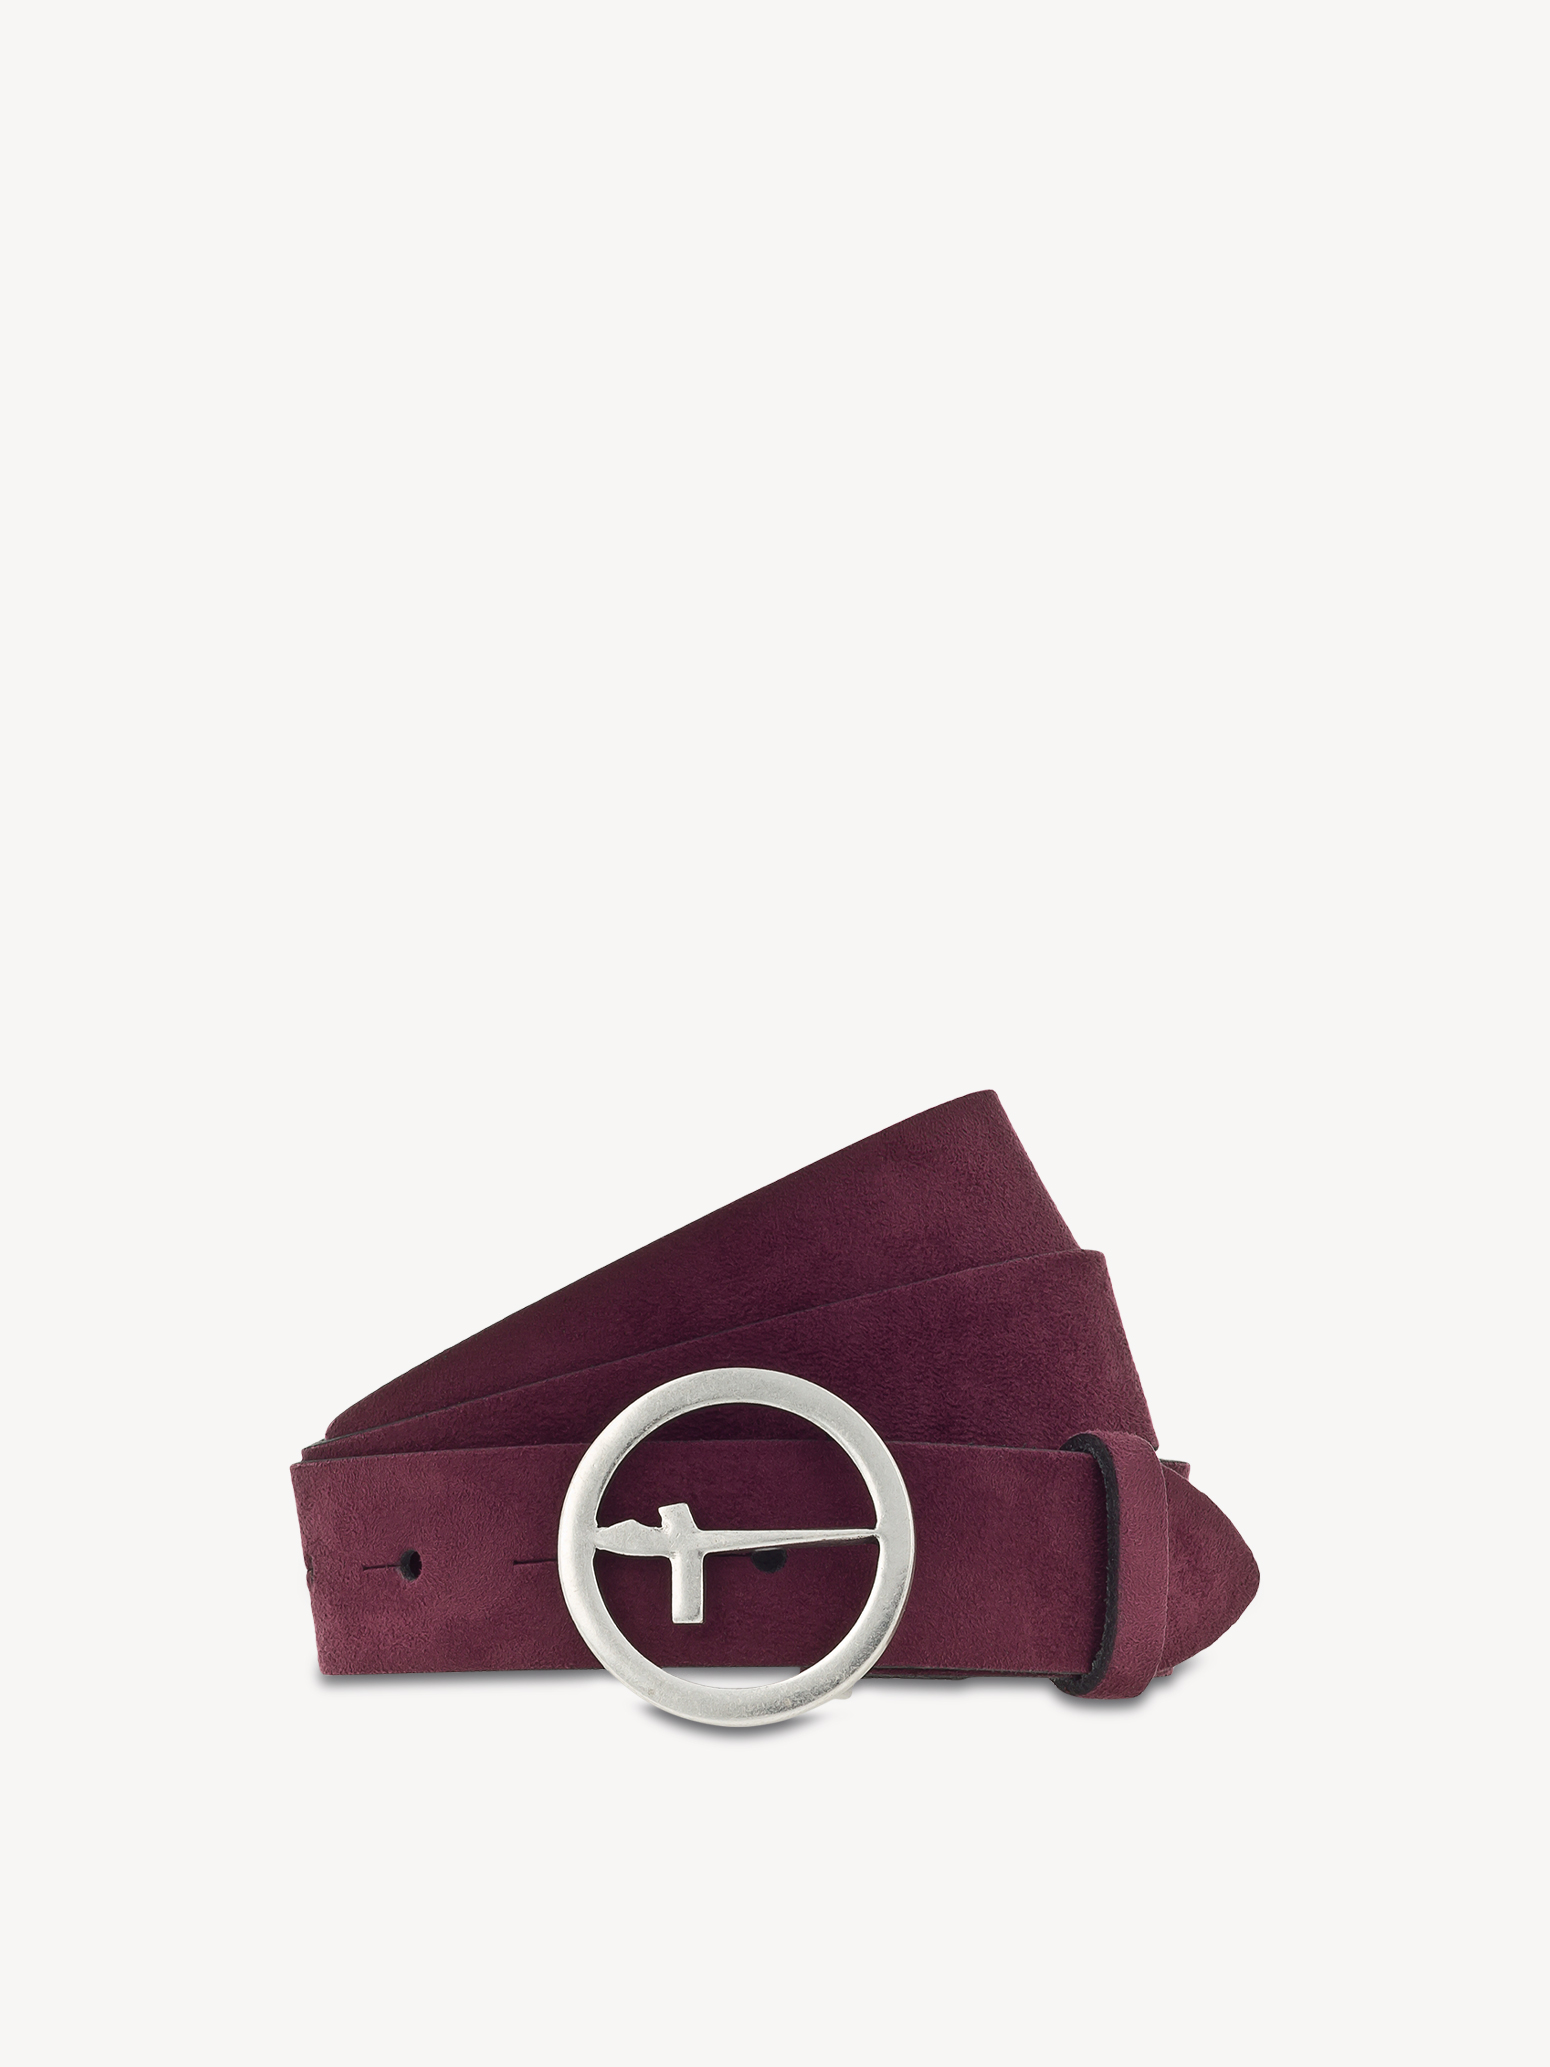 Leather Belt - red